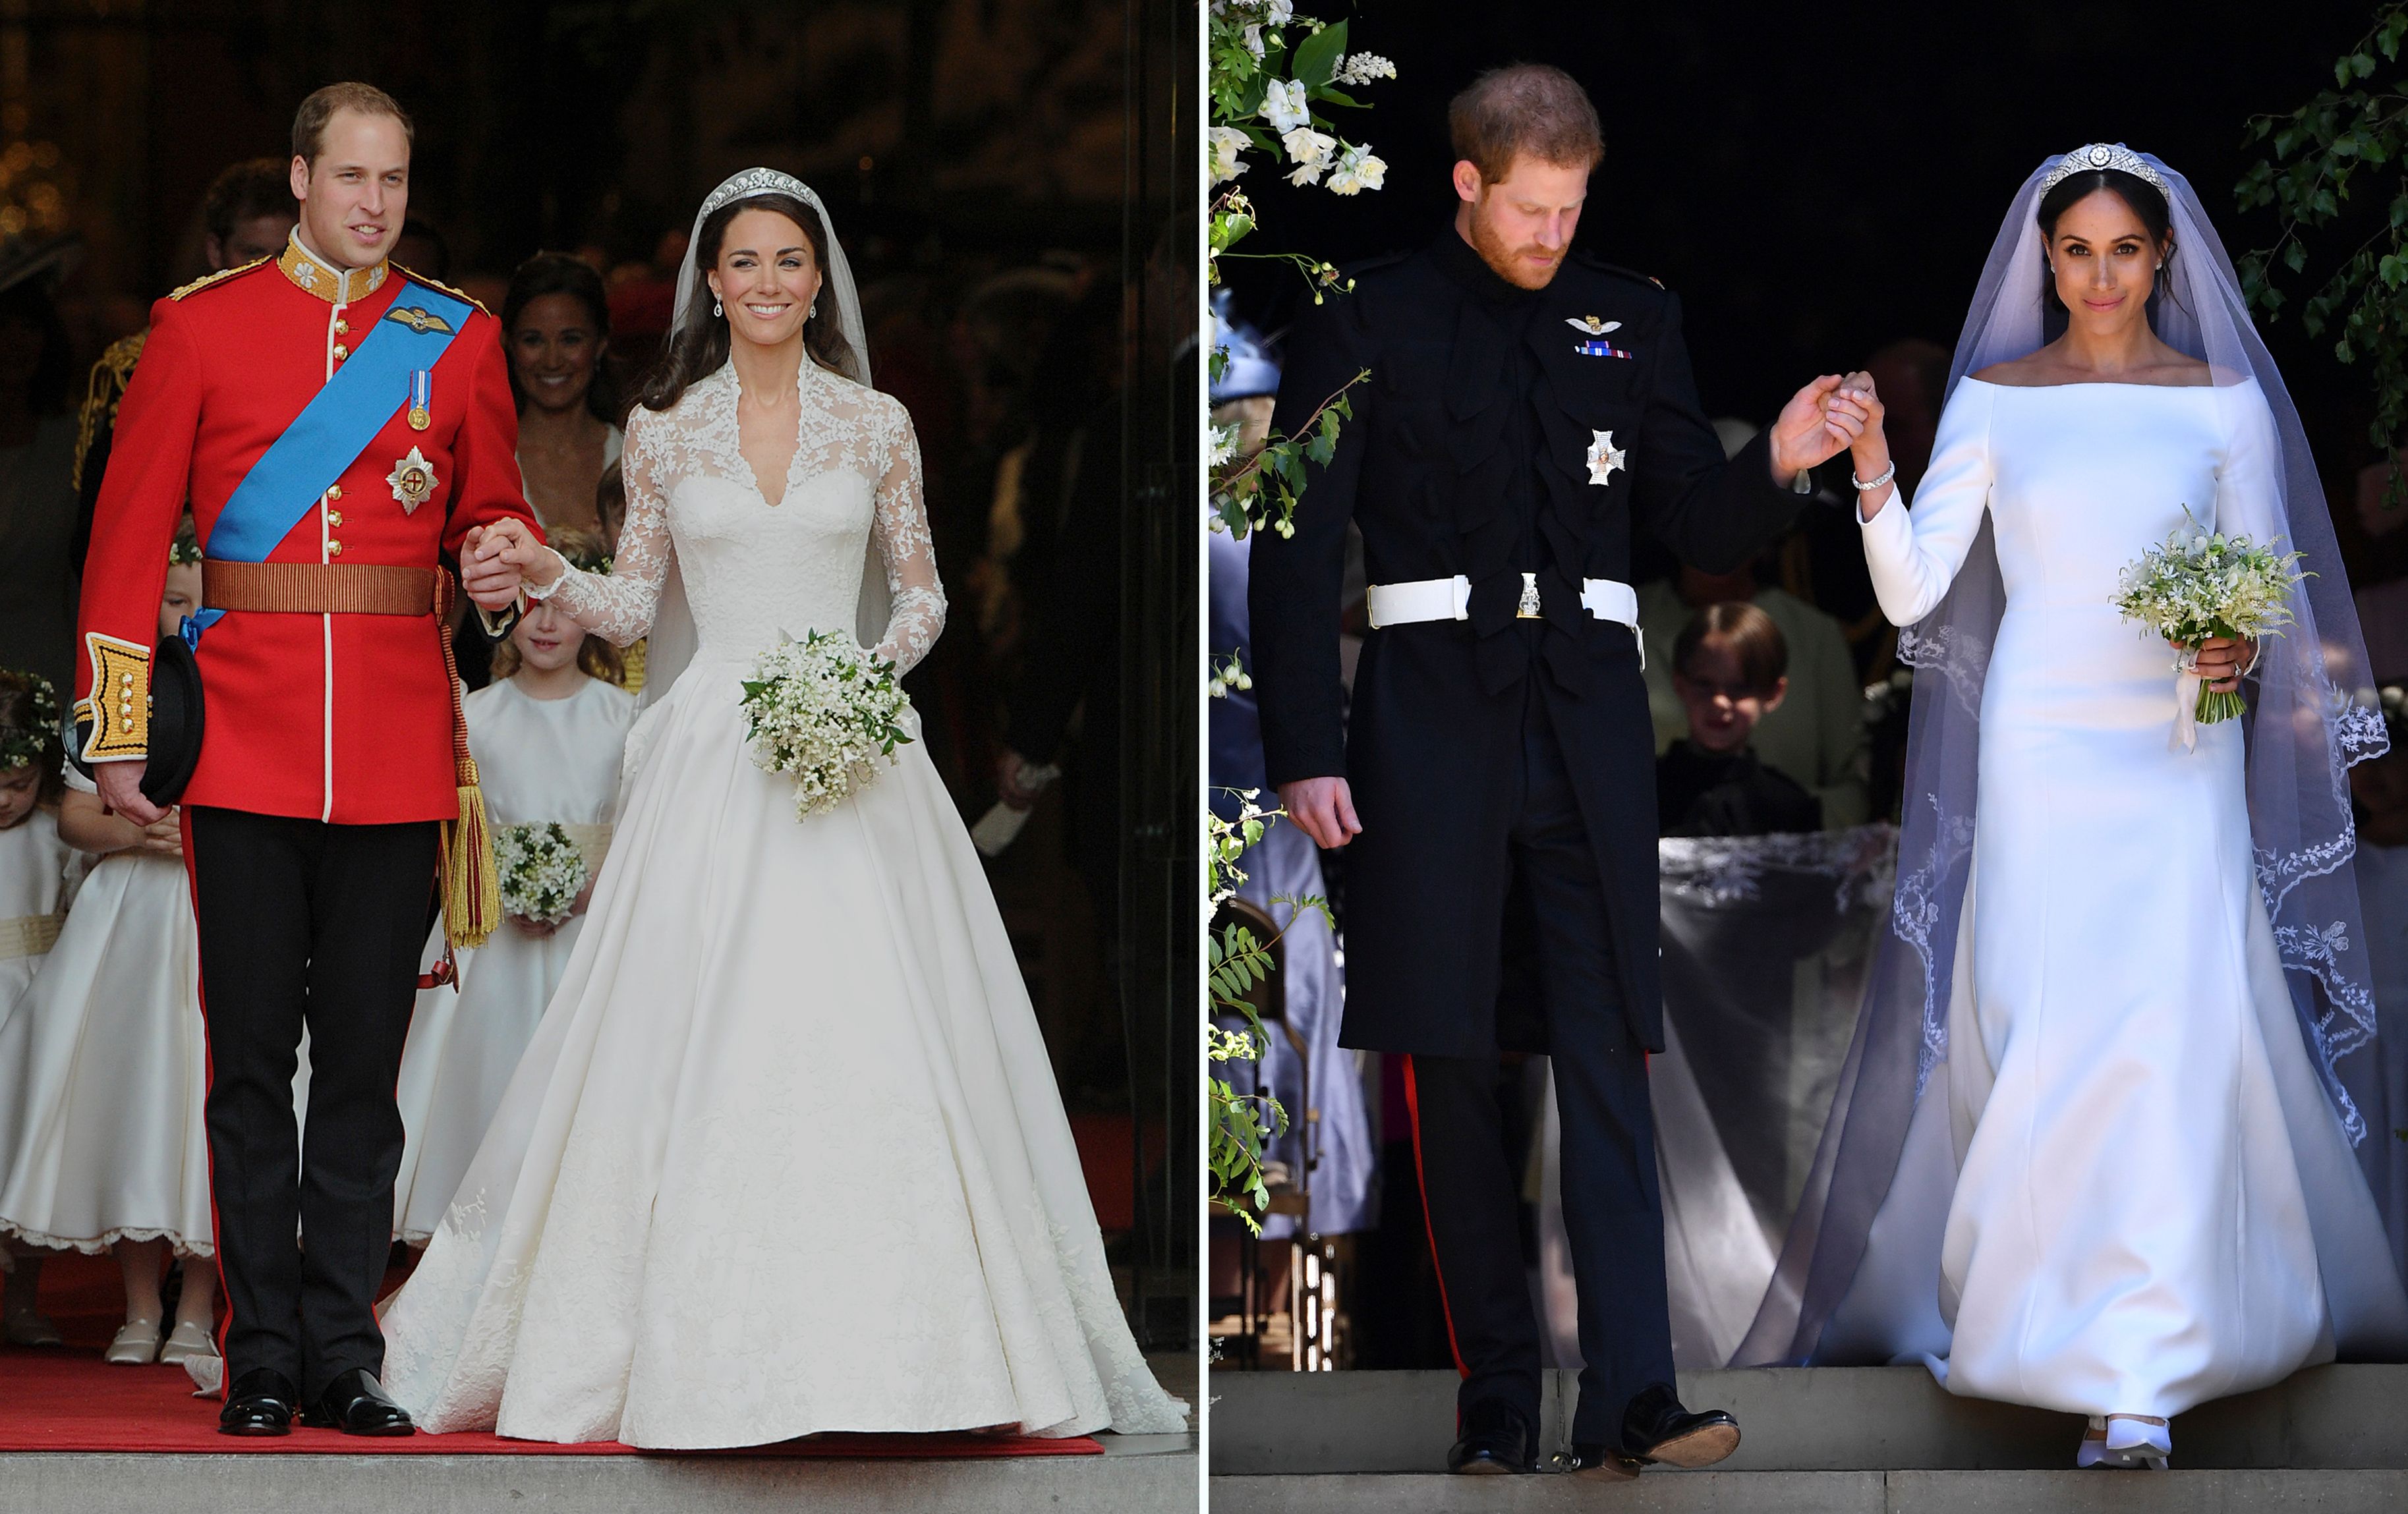 (L) Prince William and Kate Middleton's wedding, (R) Prince Harry and Meghan Markle's wedding